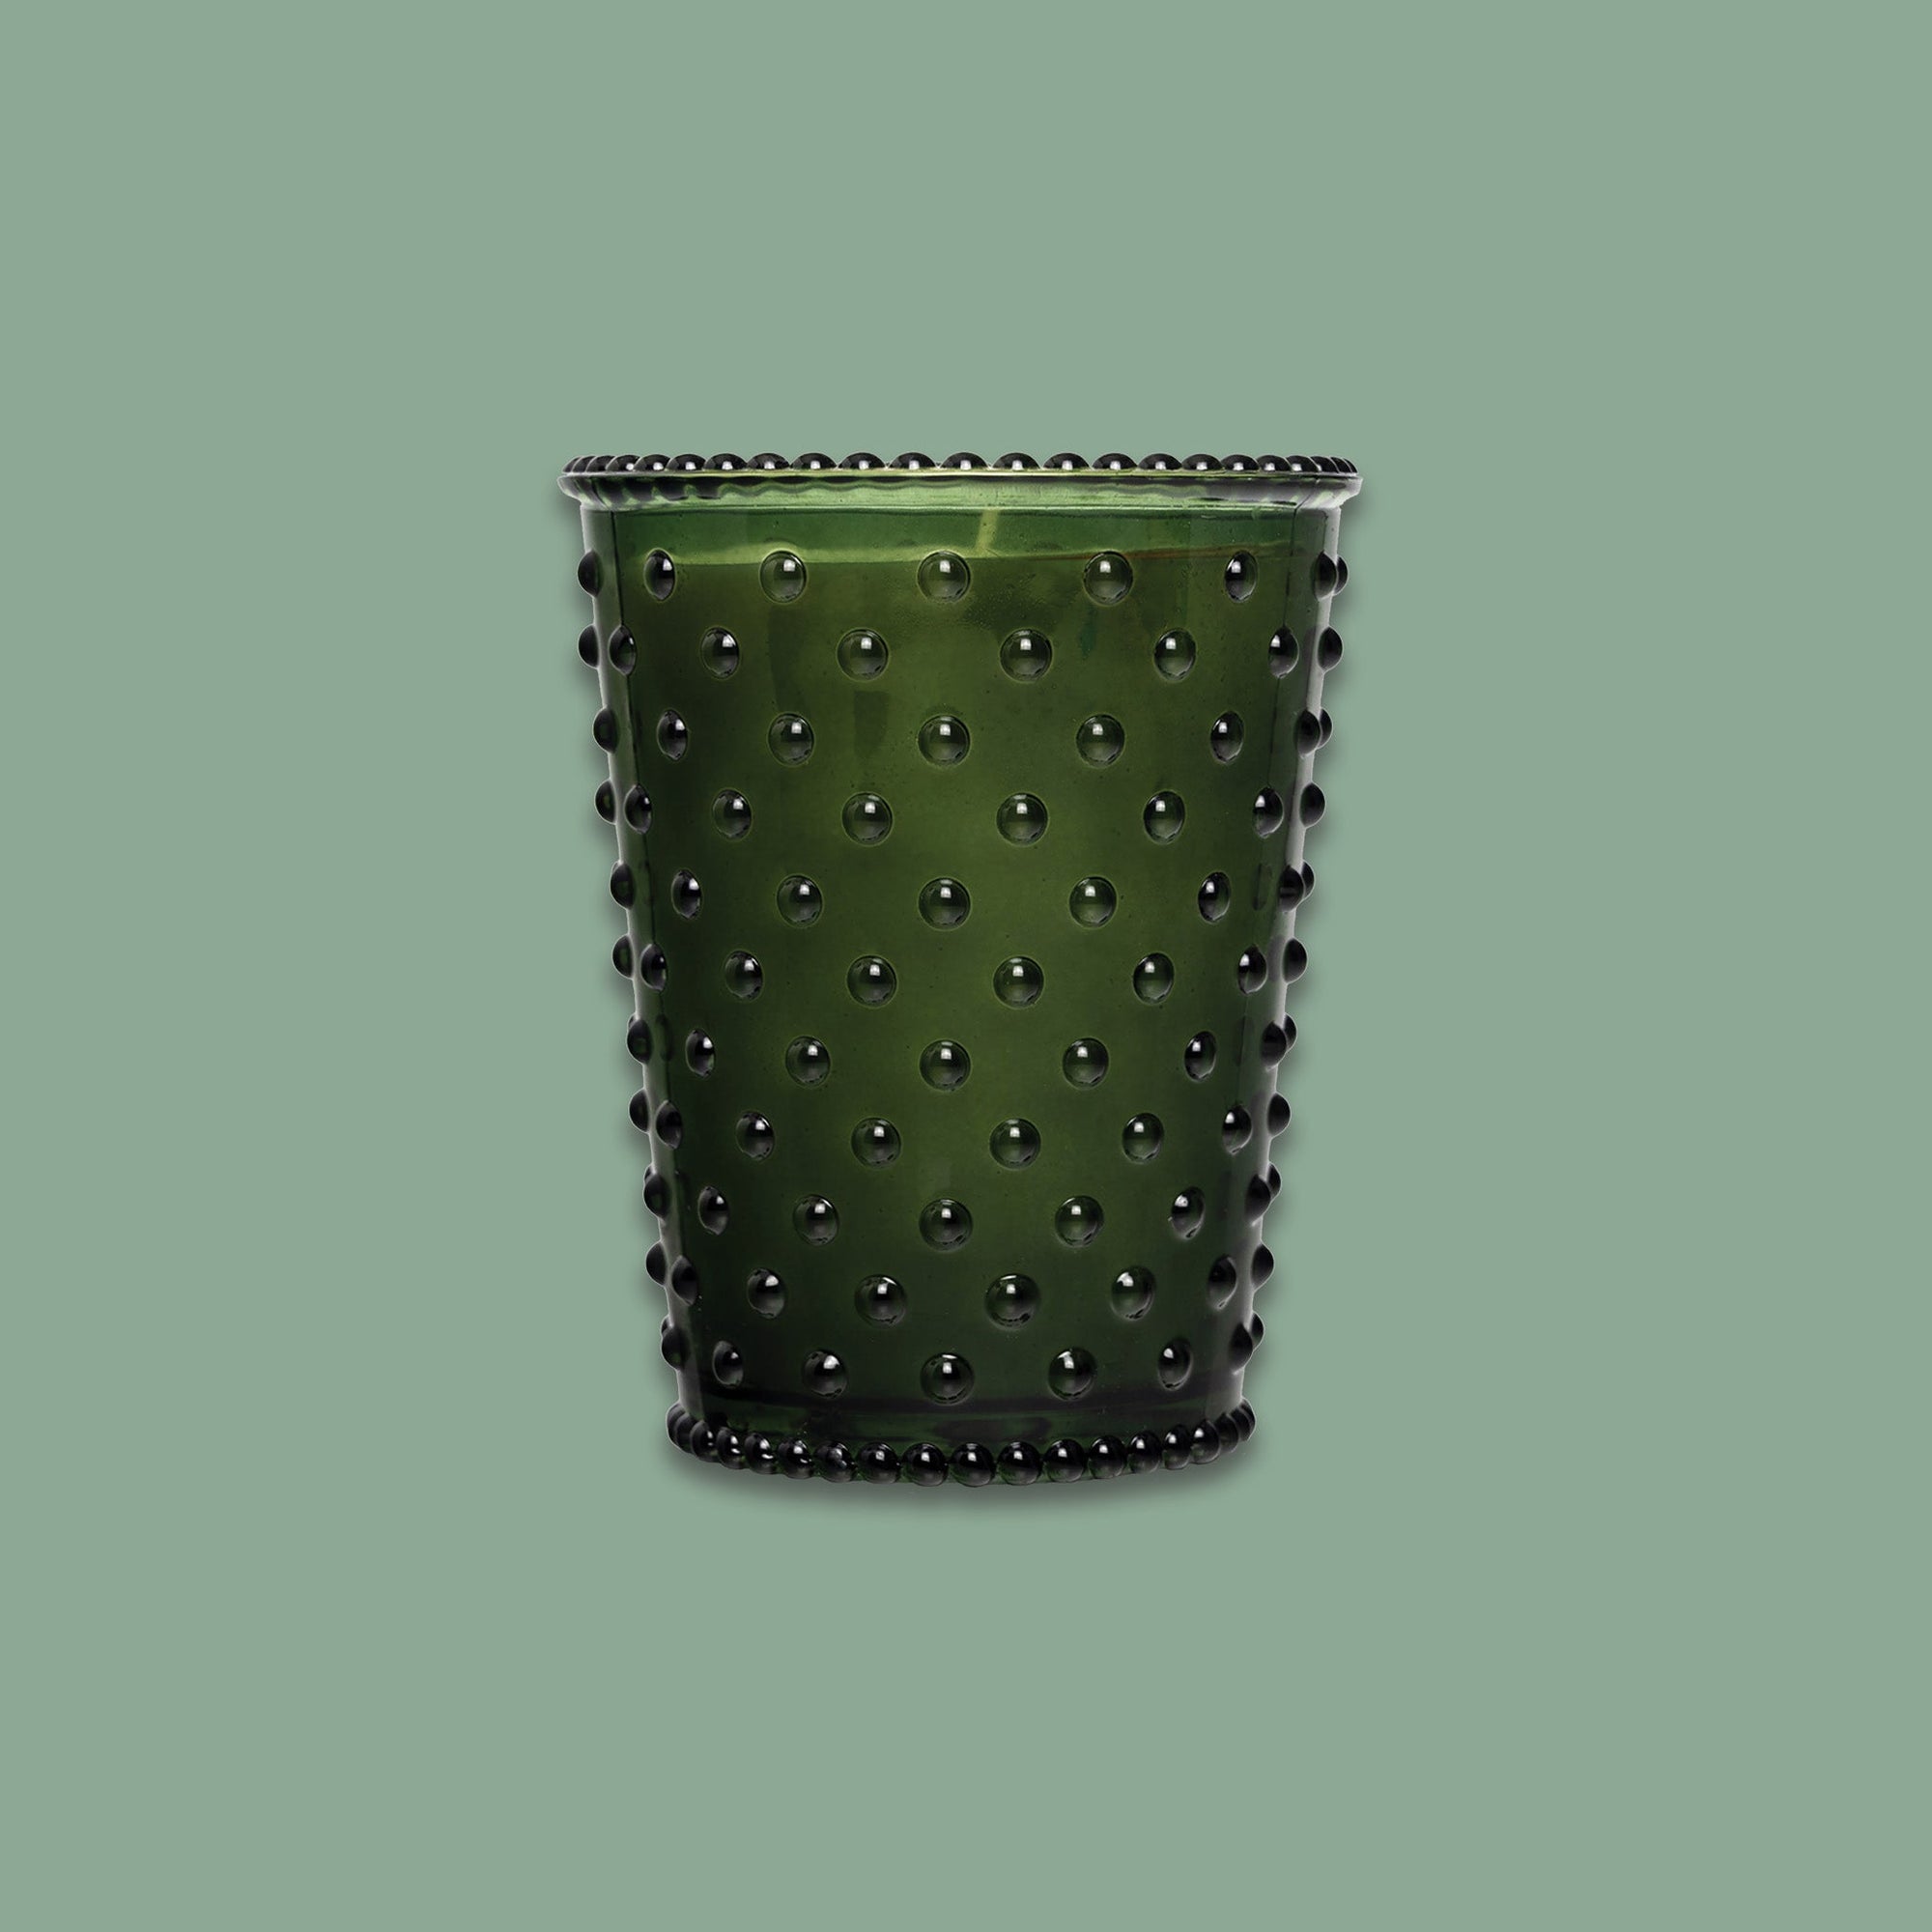 On a sage green background sits a dark green hobglass candle.